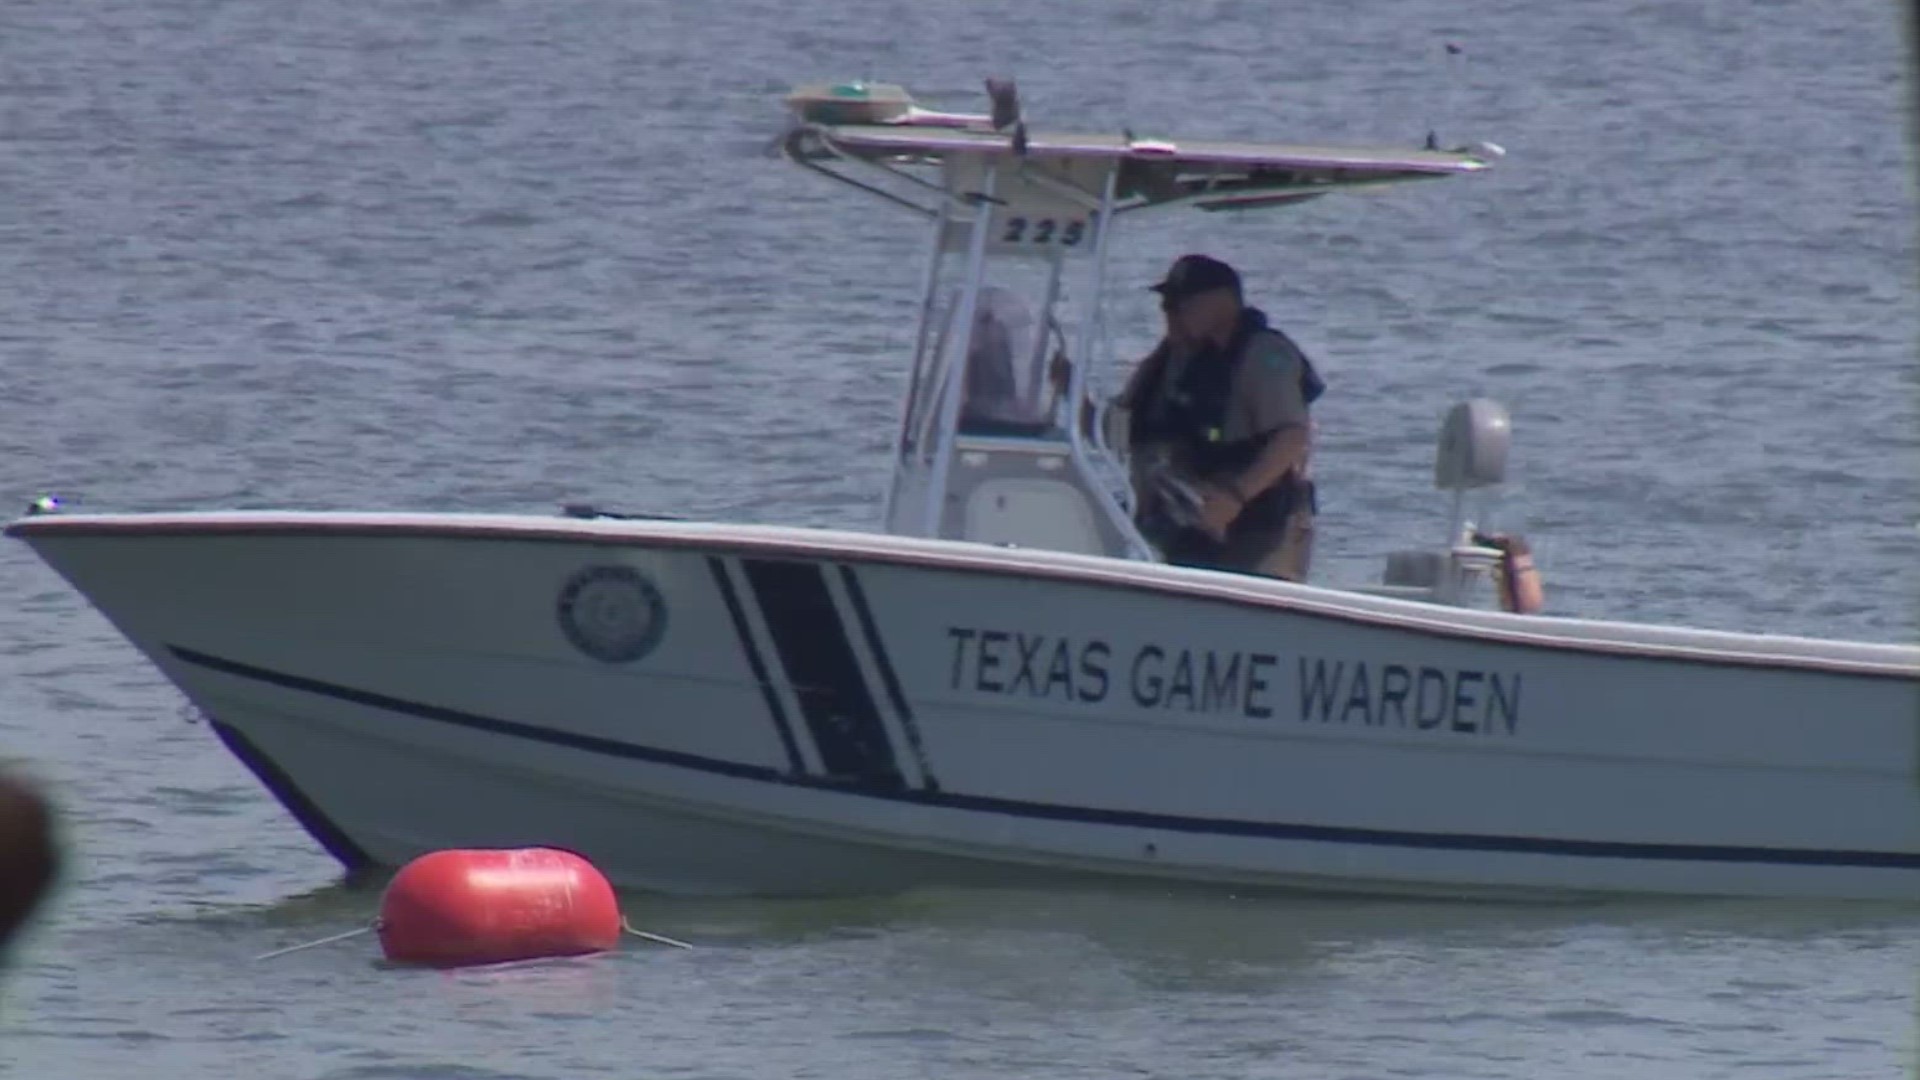 Officials said a 19-year-old from Dallas was swimming with his friends, went under water and reportedly did not resurface.